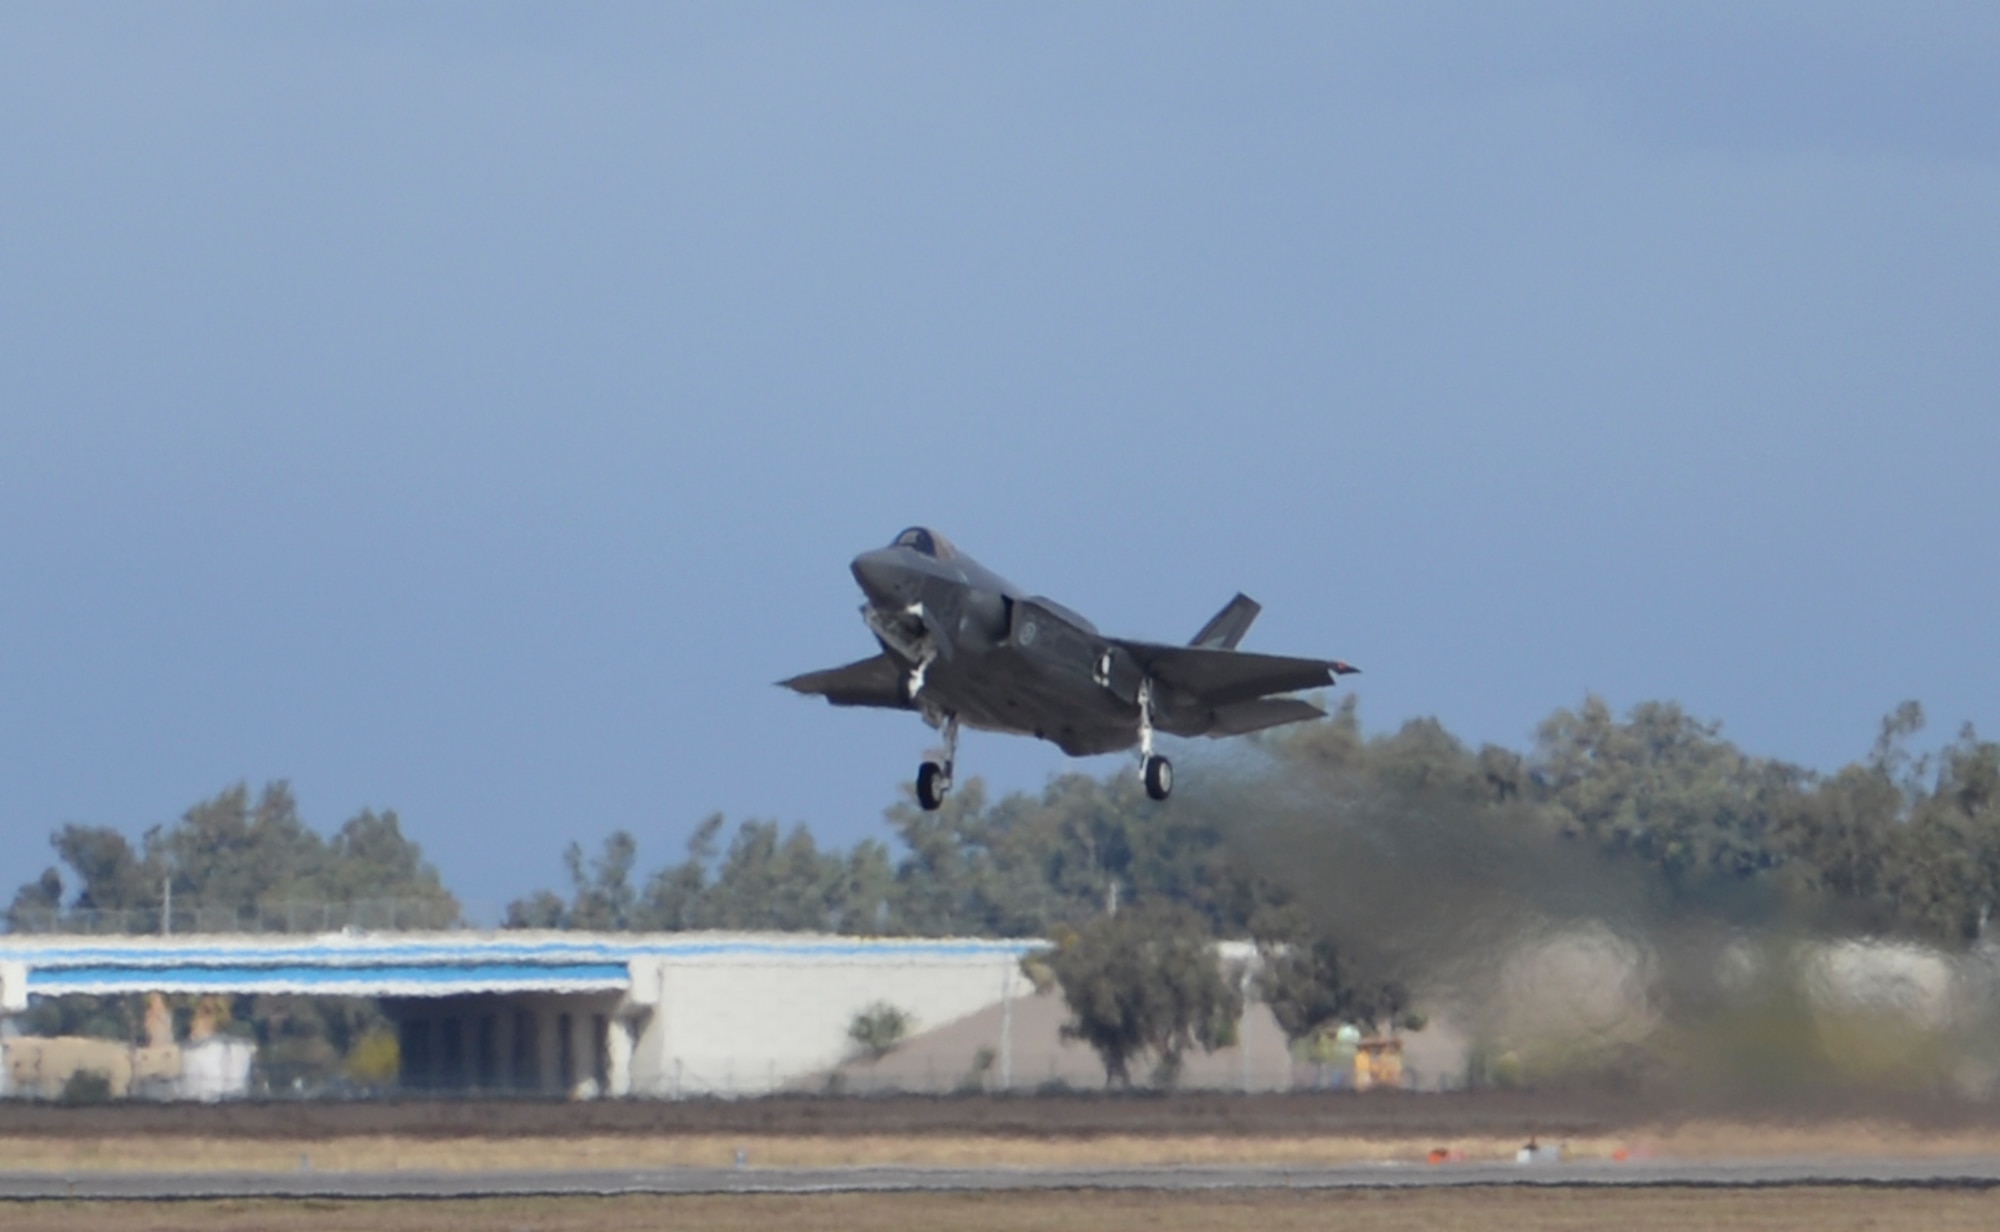 Norwegian Maj. Morten Hanche, 62nd Fighter Squadron F-35 student pilot, makes a historic takeoff Dec. 14, 2015, at Luke Air Force Base. This was the first time a Norwegian jet was launched under the helm of a Norwegian pilot. (U.S. Air Force photo by Airman 1st Class Ridge Shan)